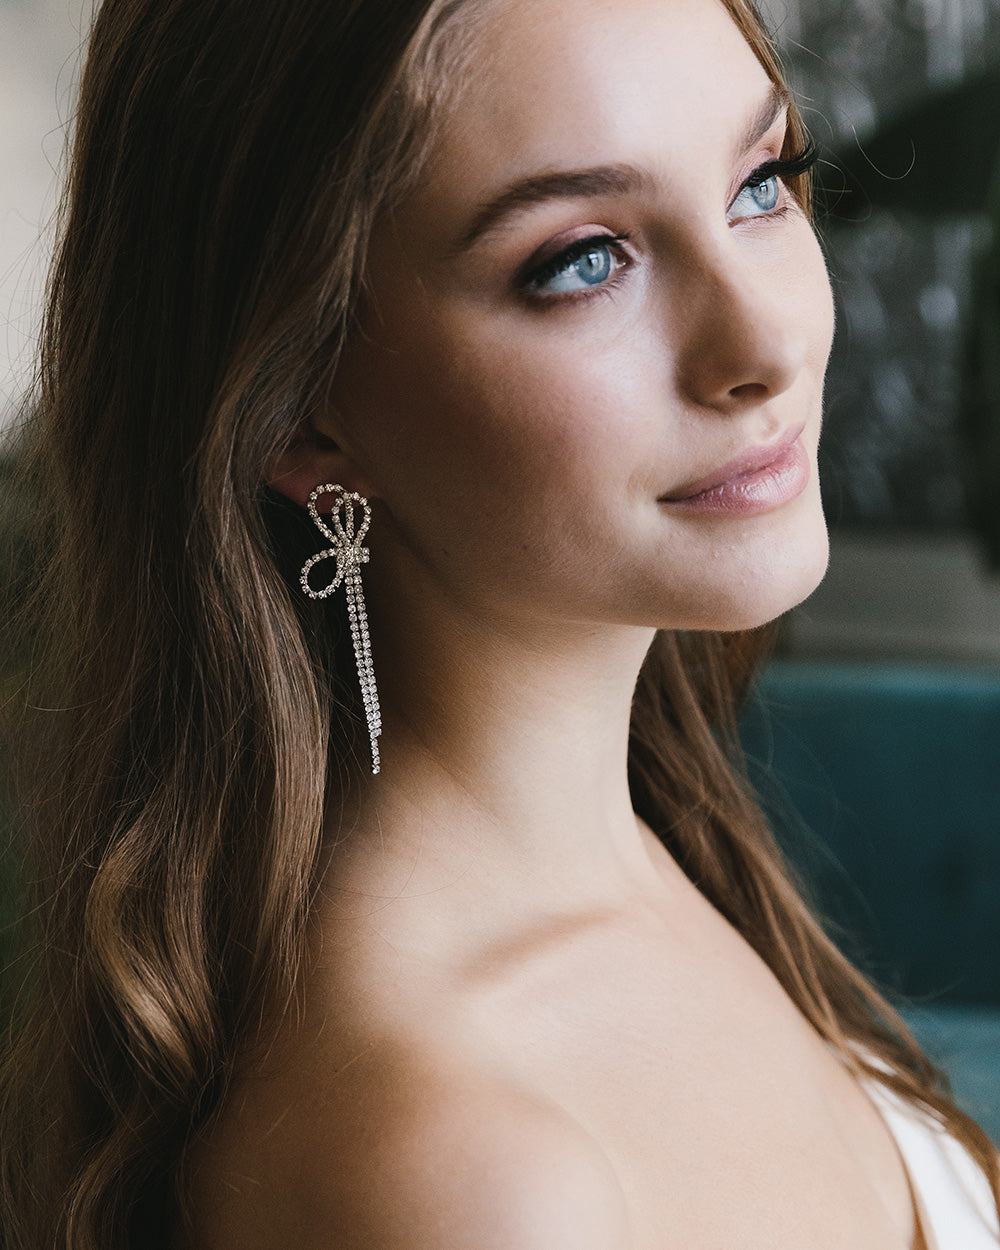 Earrings with Bows